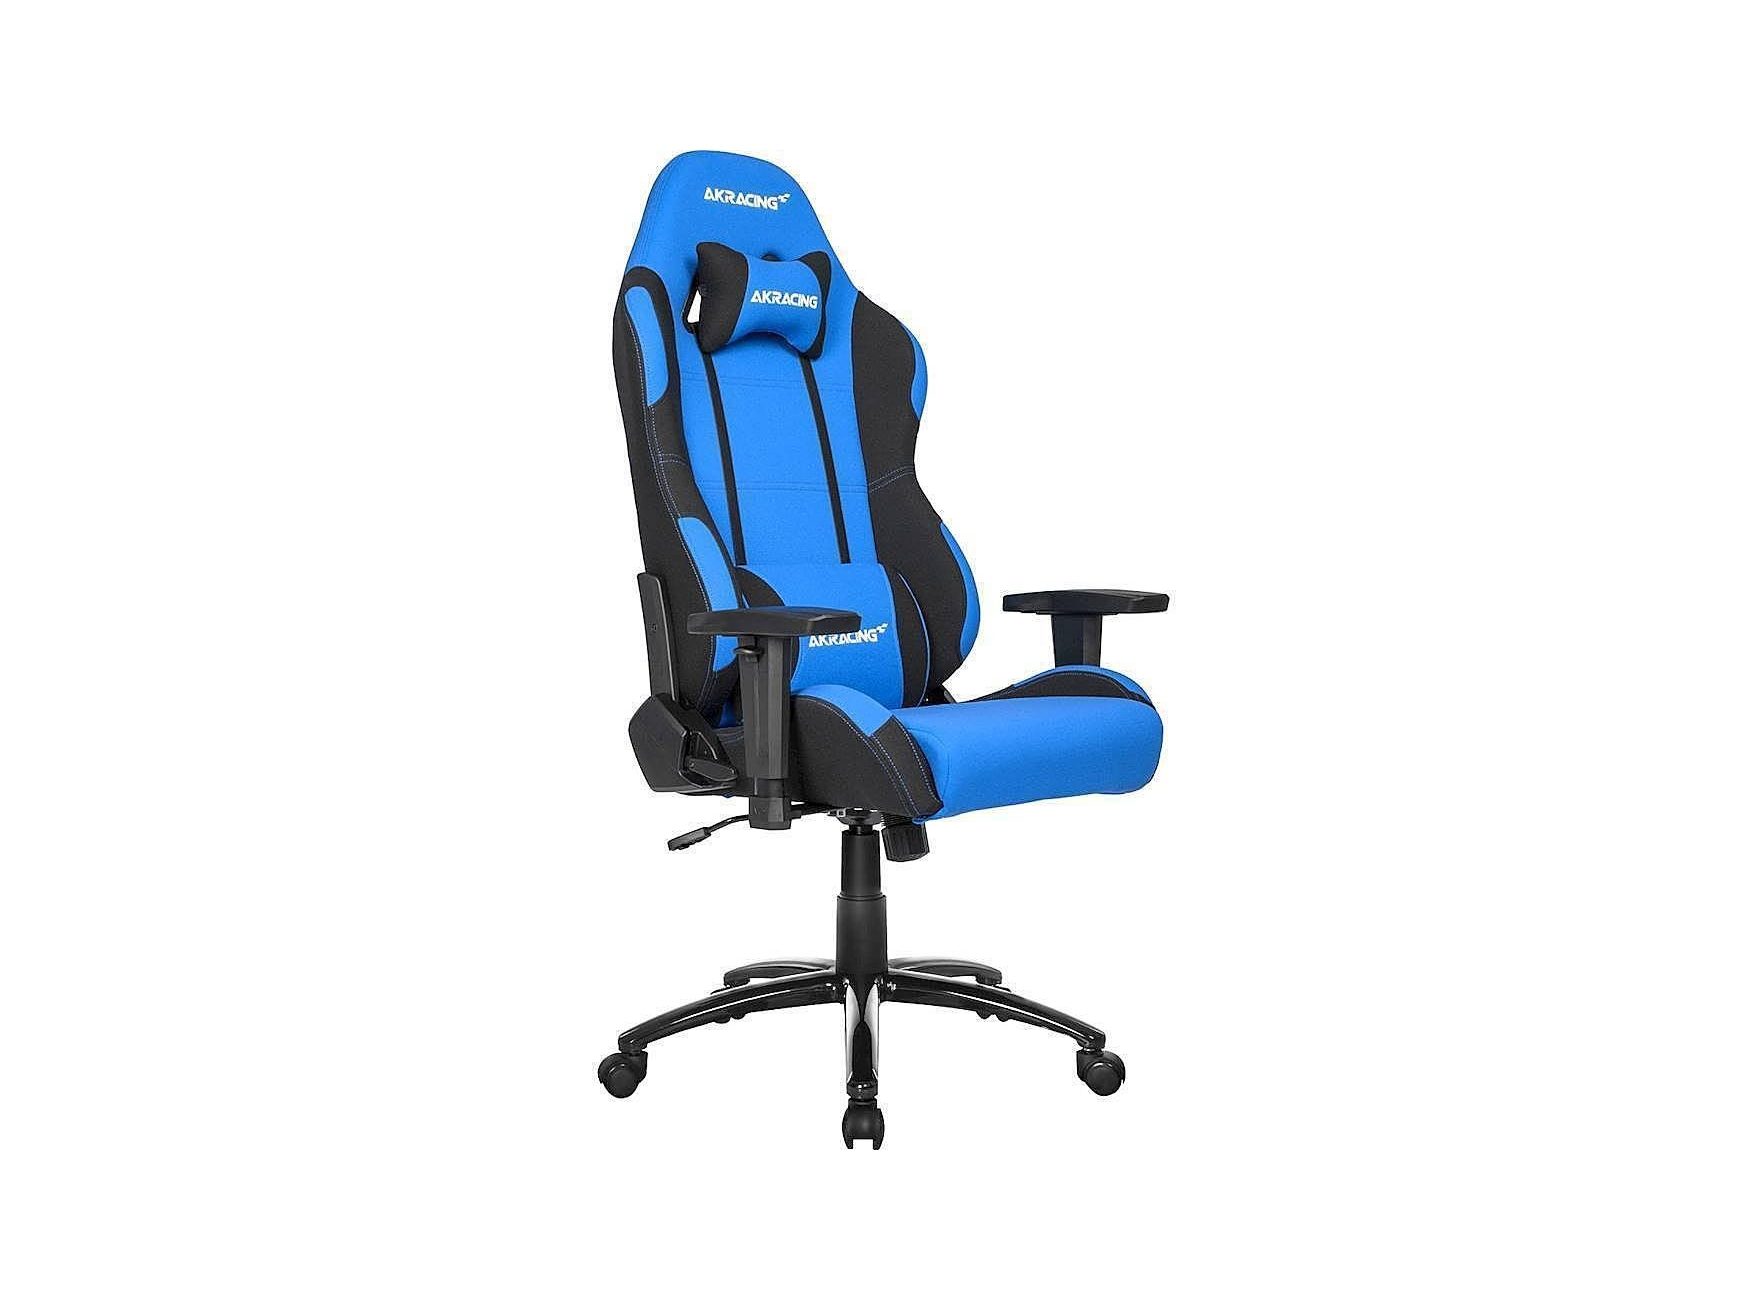 The blue version of the AKRacing Core Series EX Gaming Chair, shown at a slight tilt.